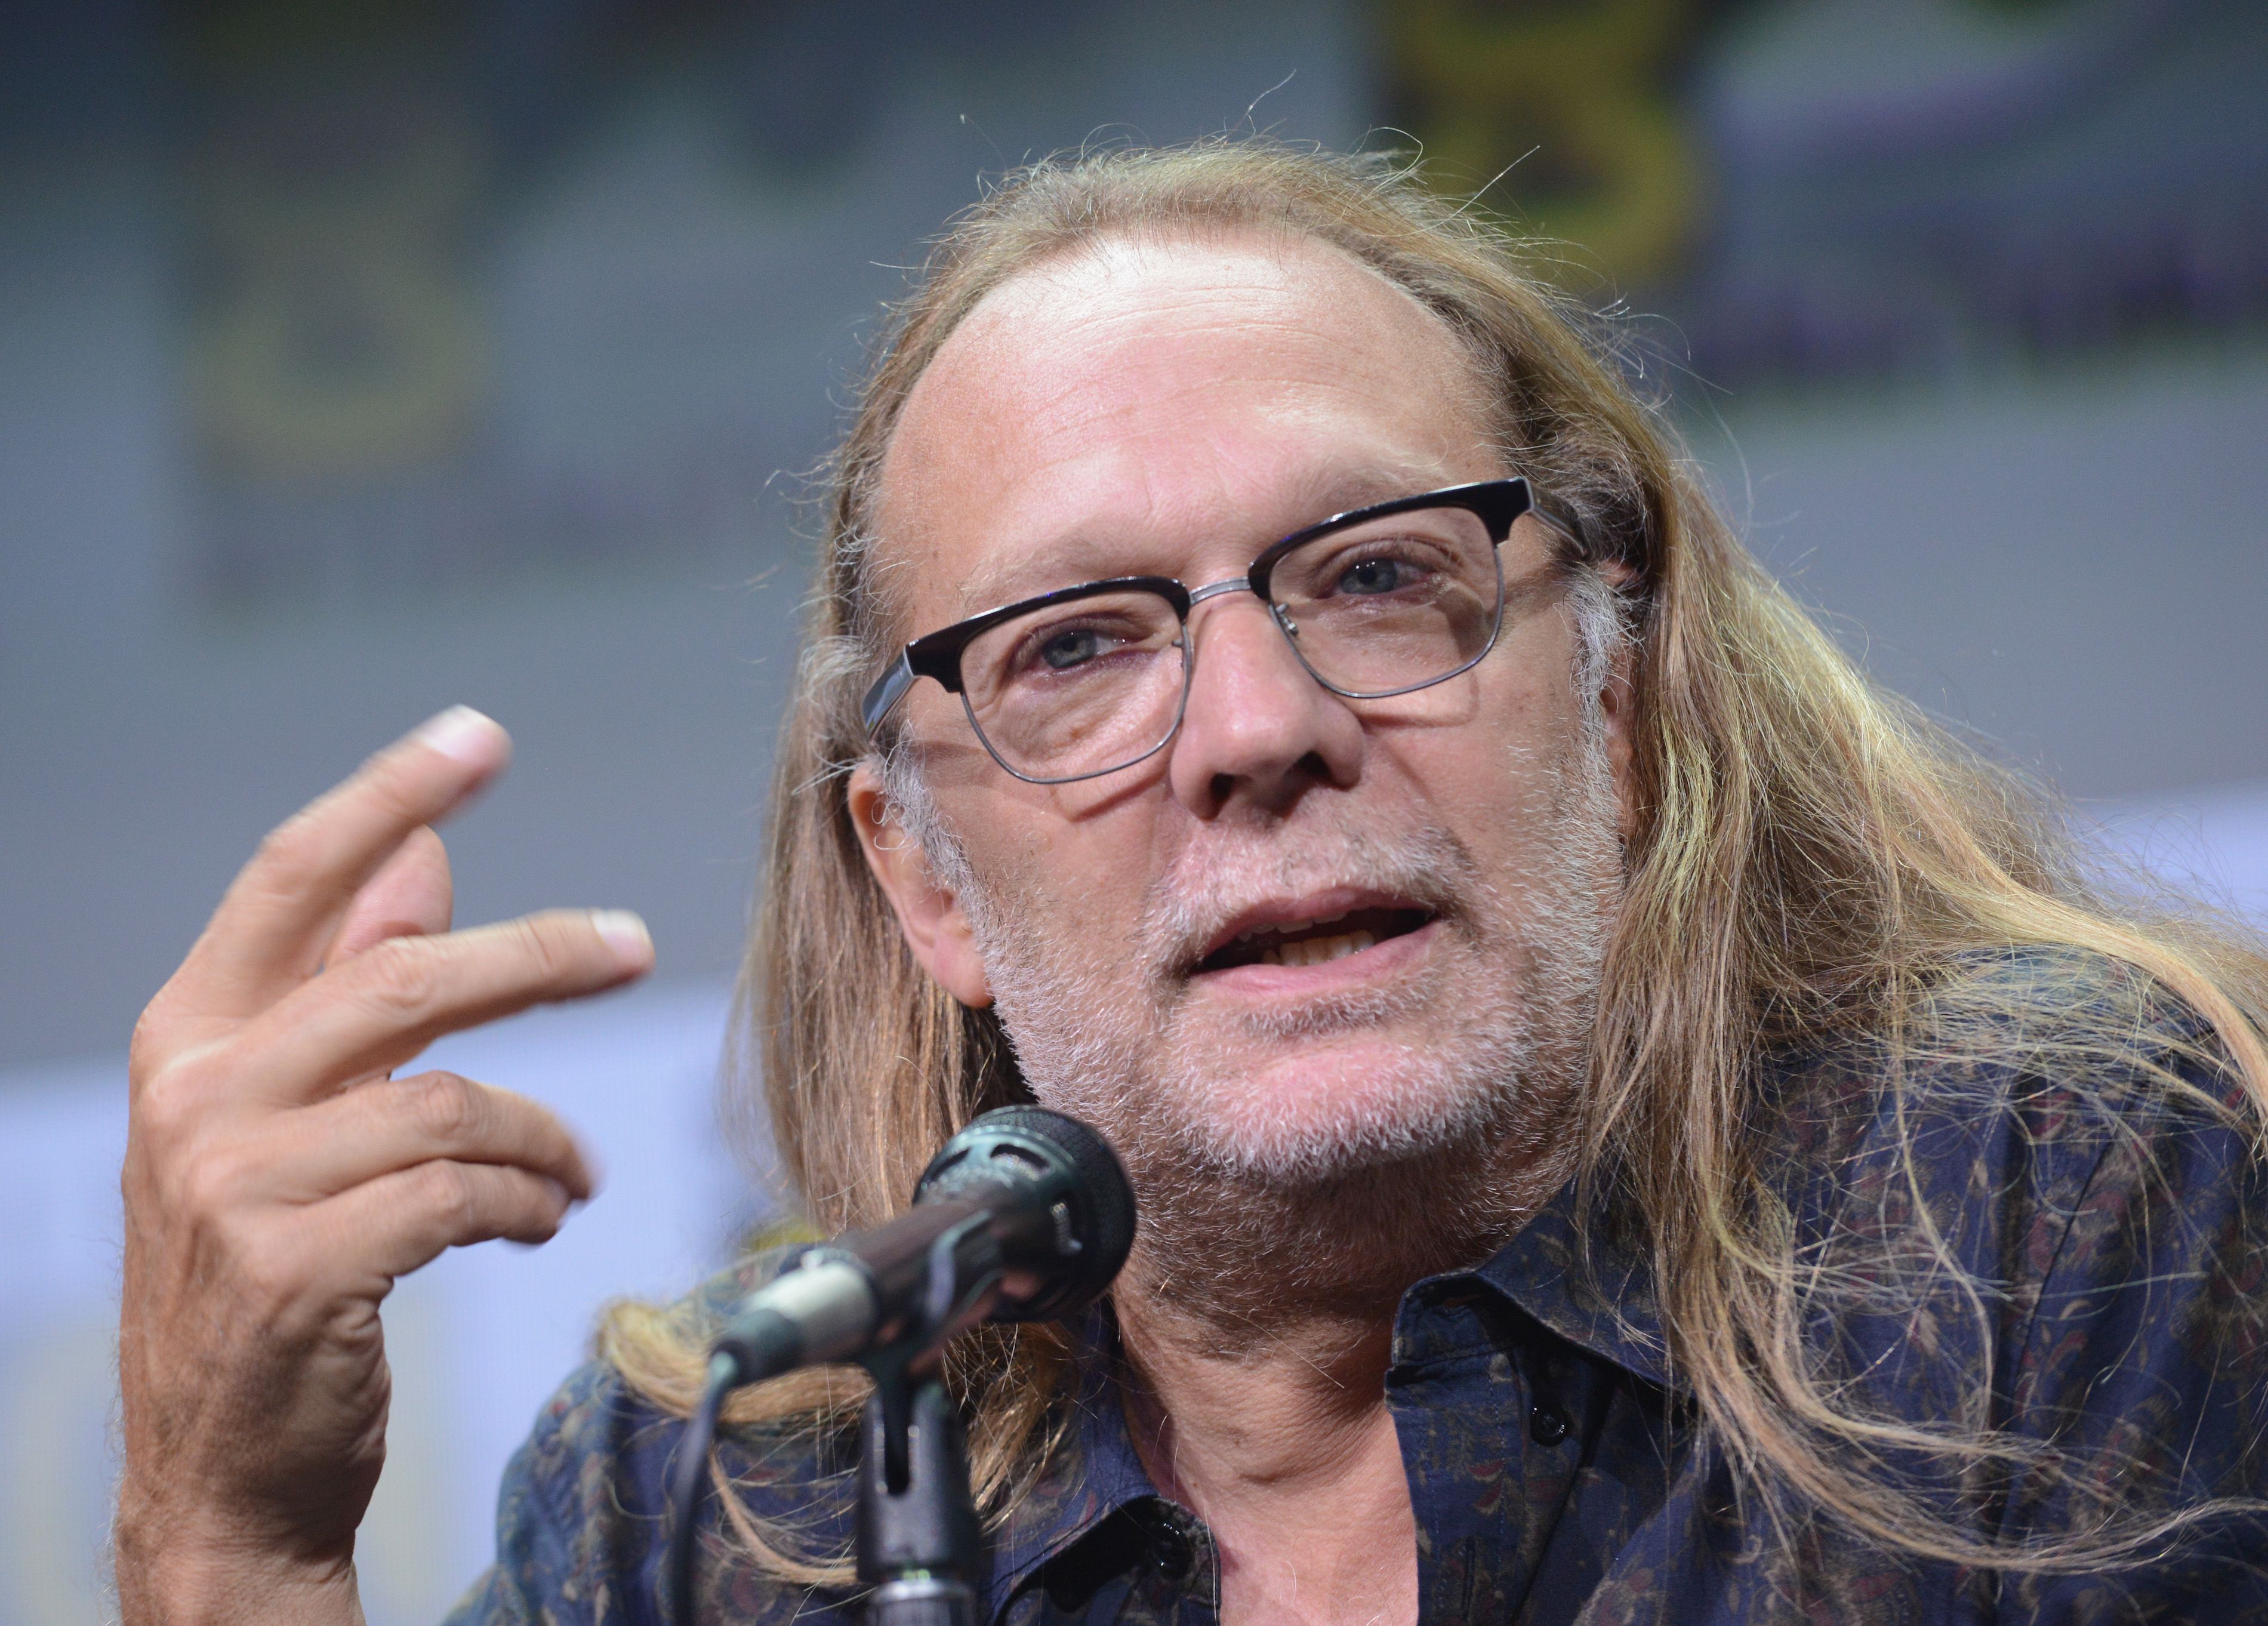 Greg Nicotero On Directing The Walking Dead Finale: 'It's A Pretty Amazing  Episode' – Exclusive Image, TV Series